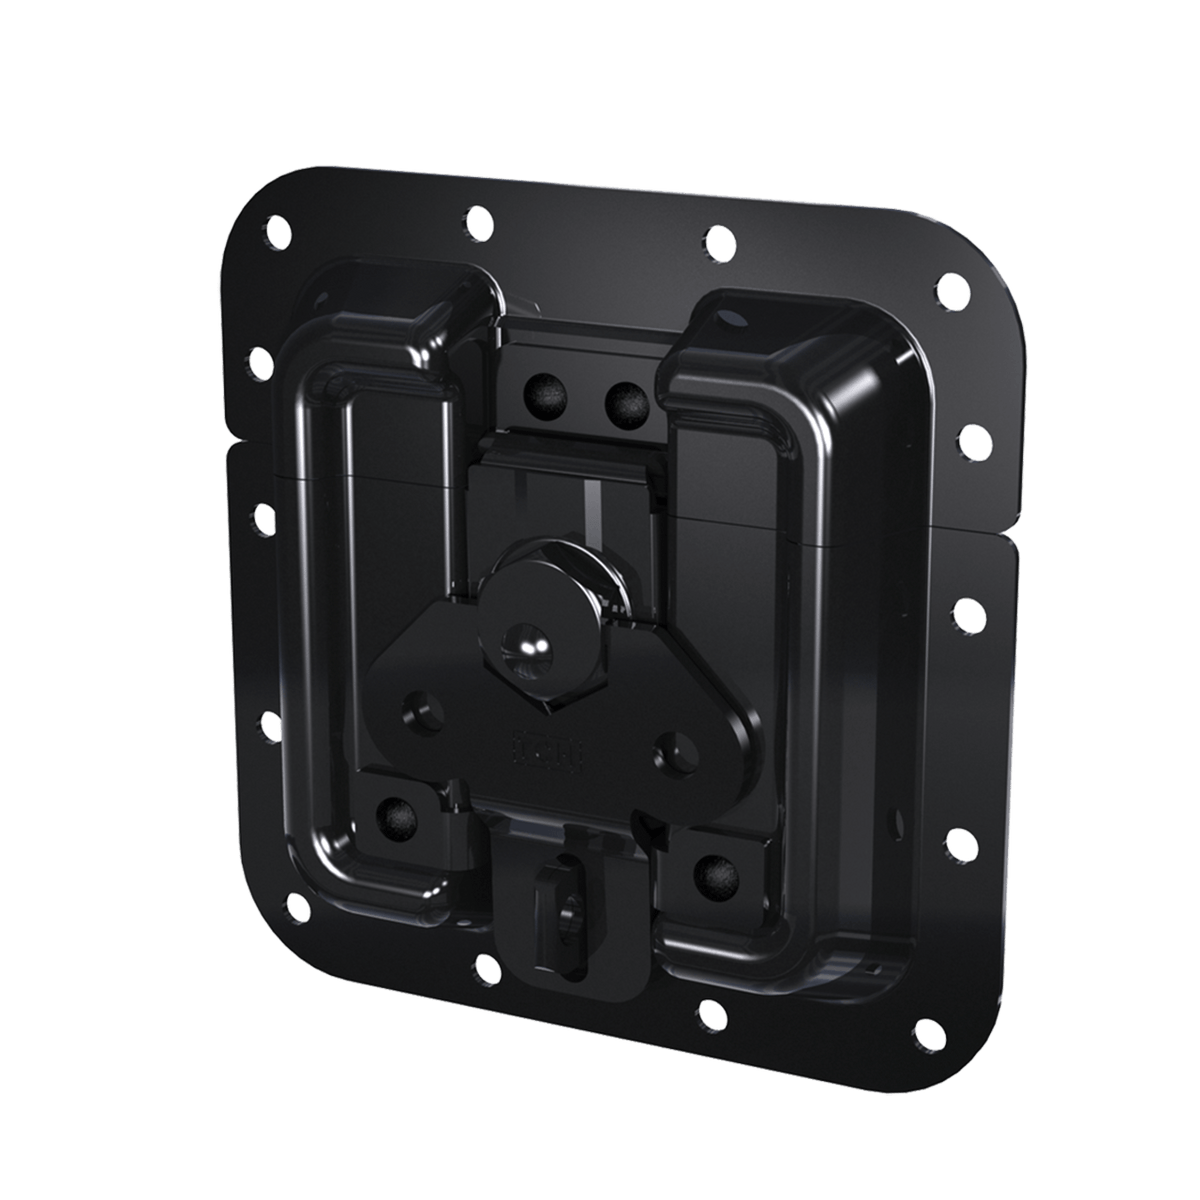 Pad lockable Protective Surface Mount Latch, Black, 3/4 view